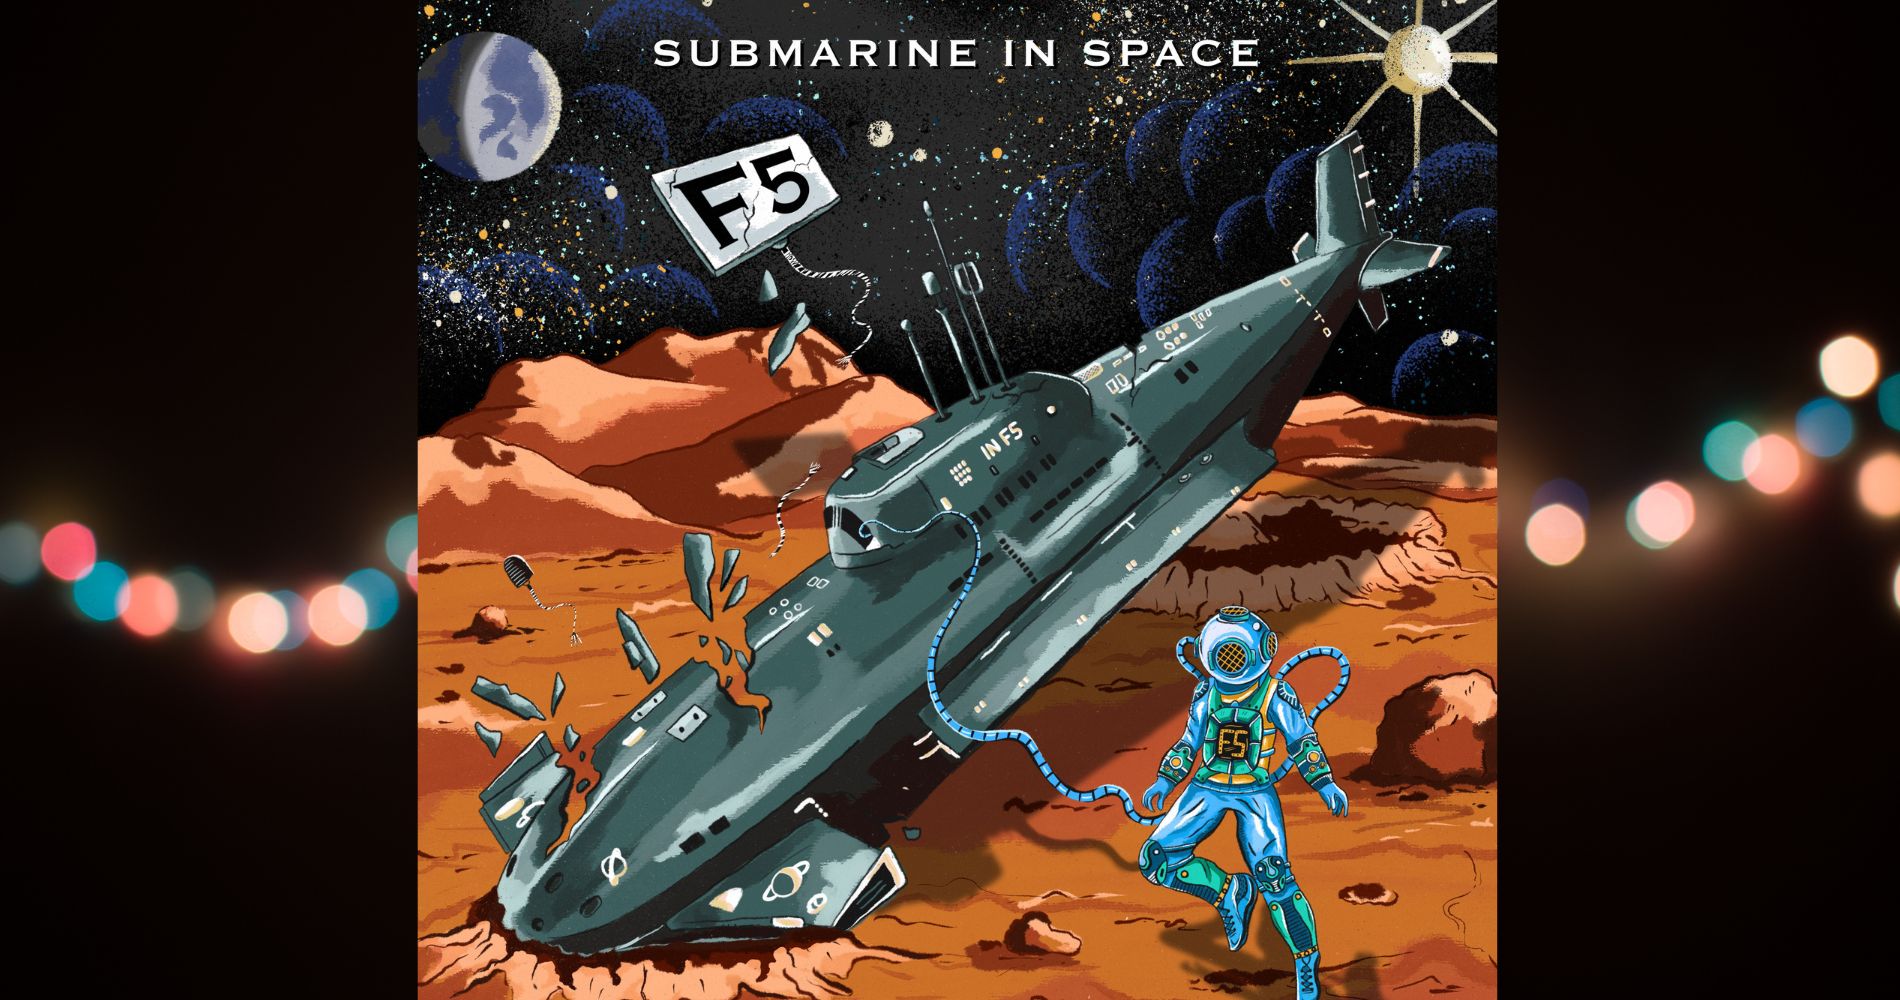 Popular music band Submarine In Space release their first single